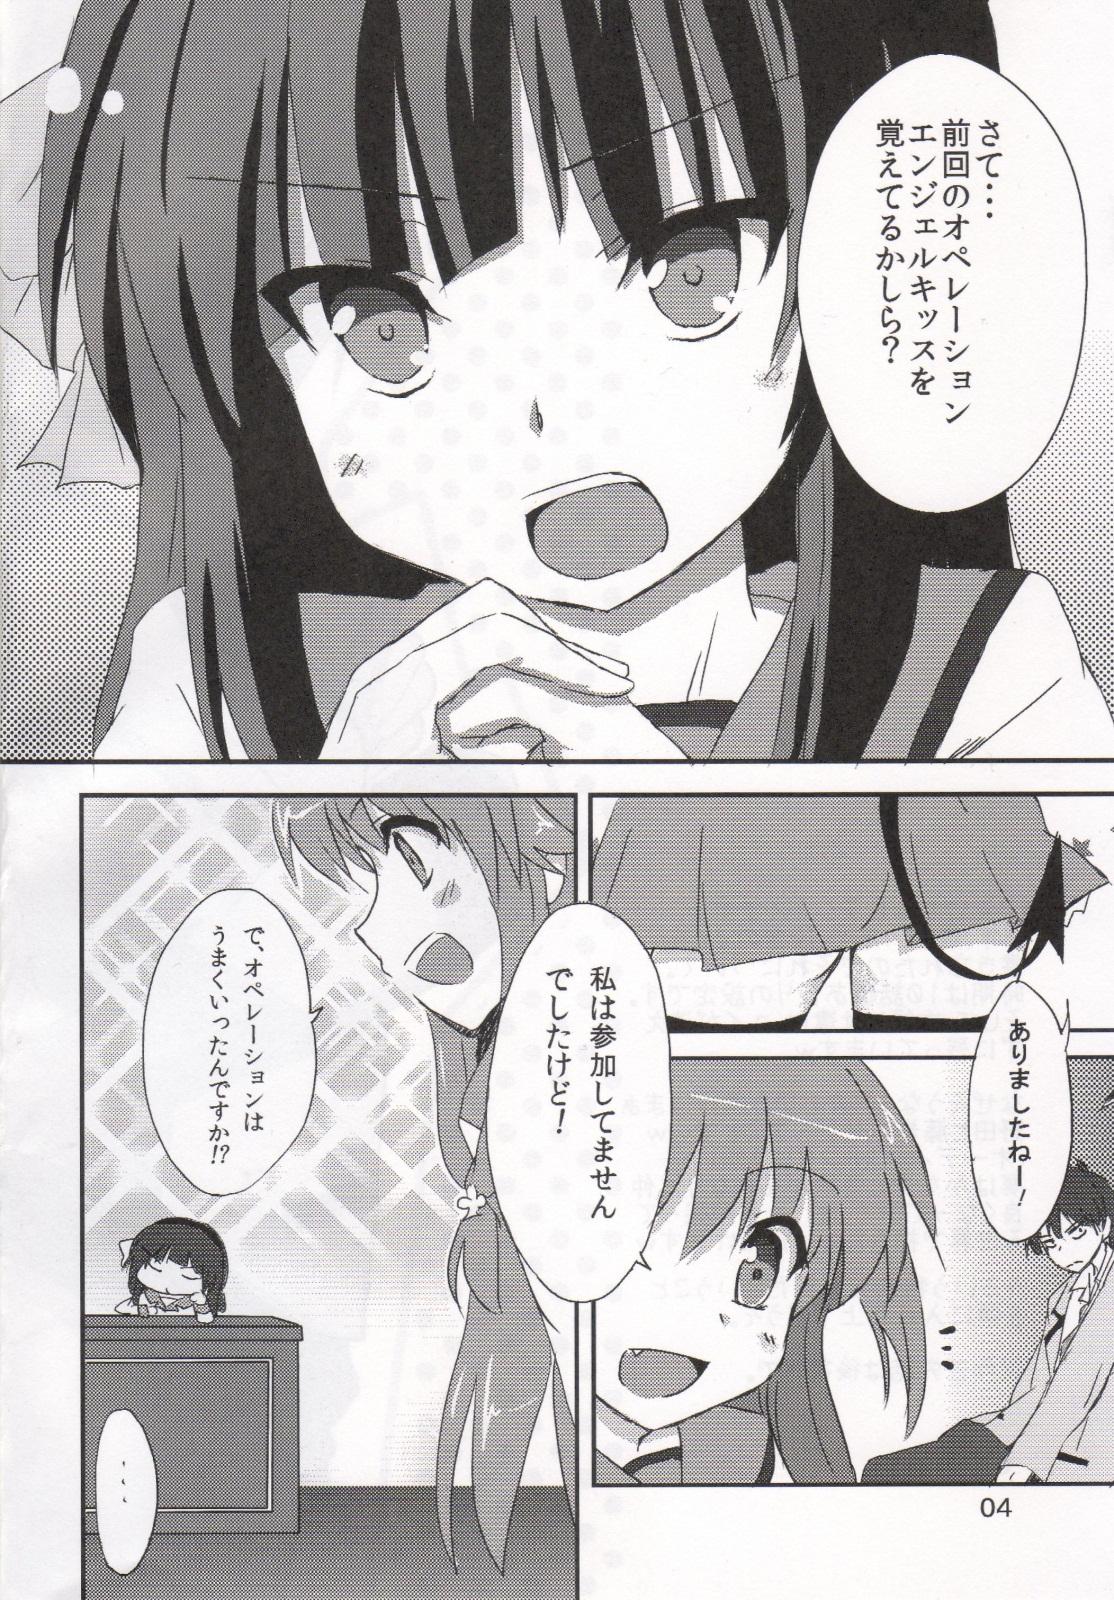 Reverse Cowgirl My Heart is yours! ver.2♪ - Angel beats Animation - Page 3